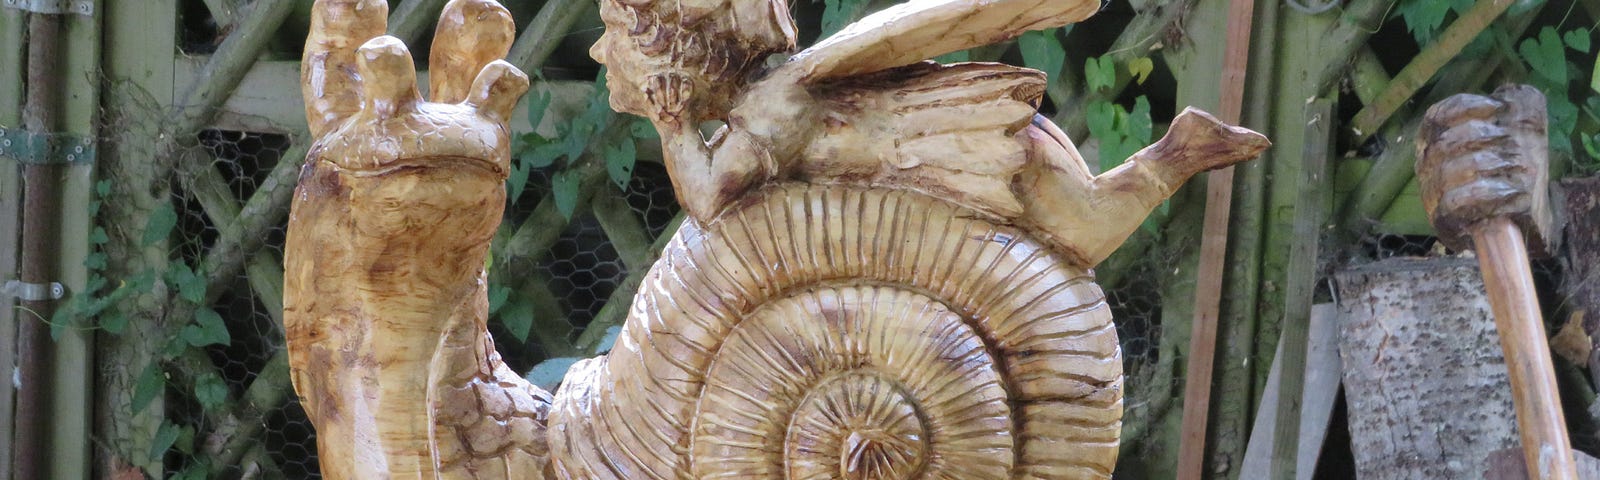 A carved wood snail and tiny fairy on its shell.